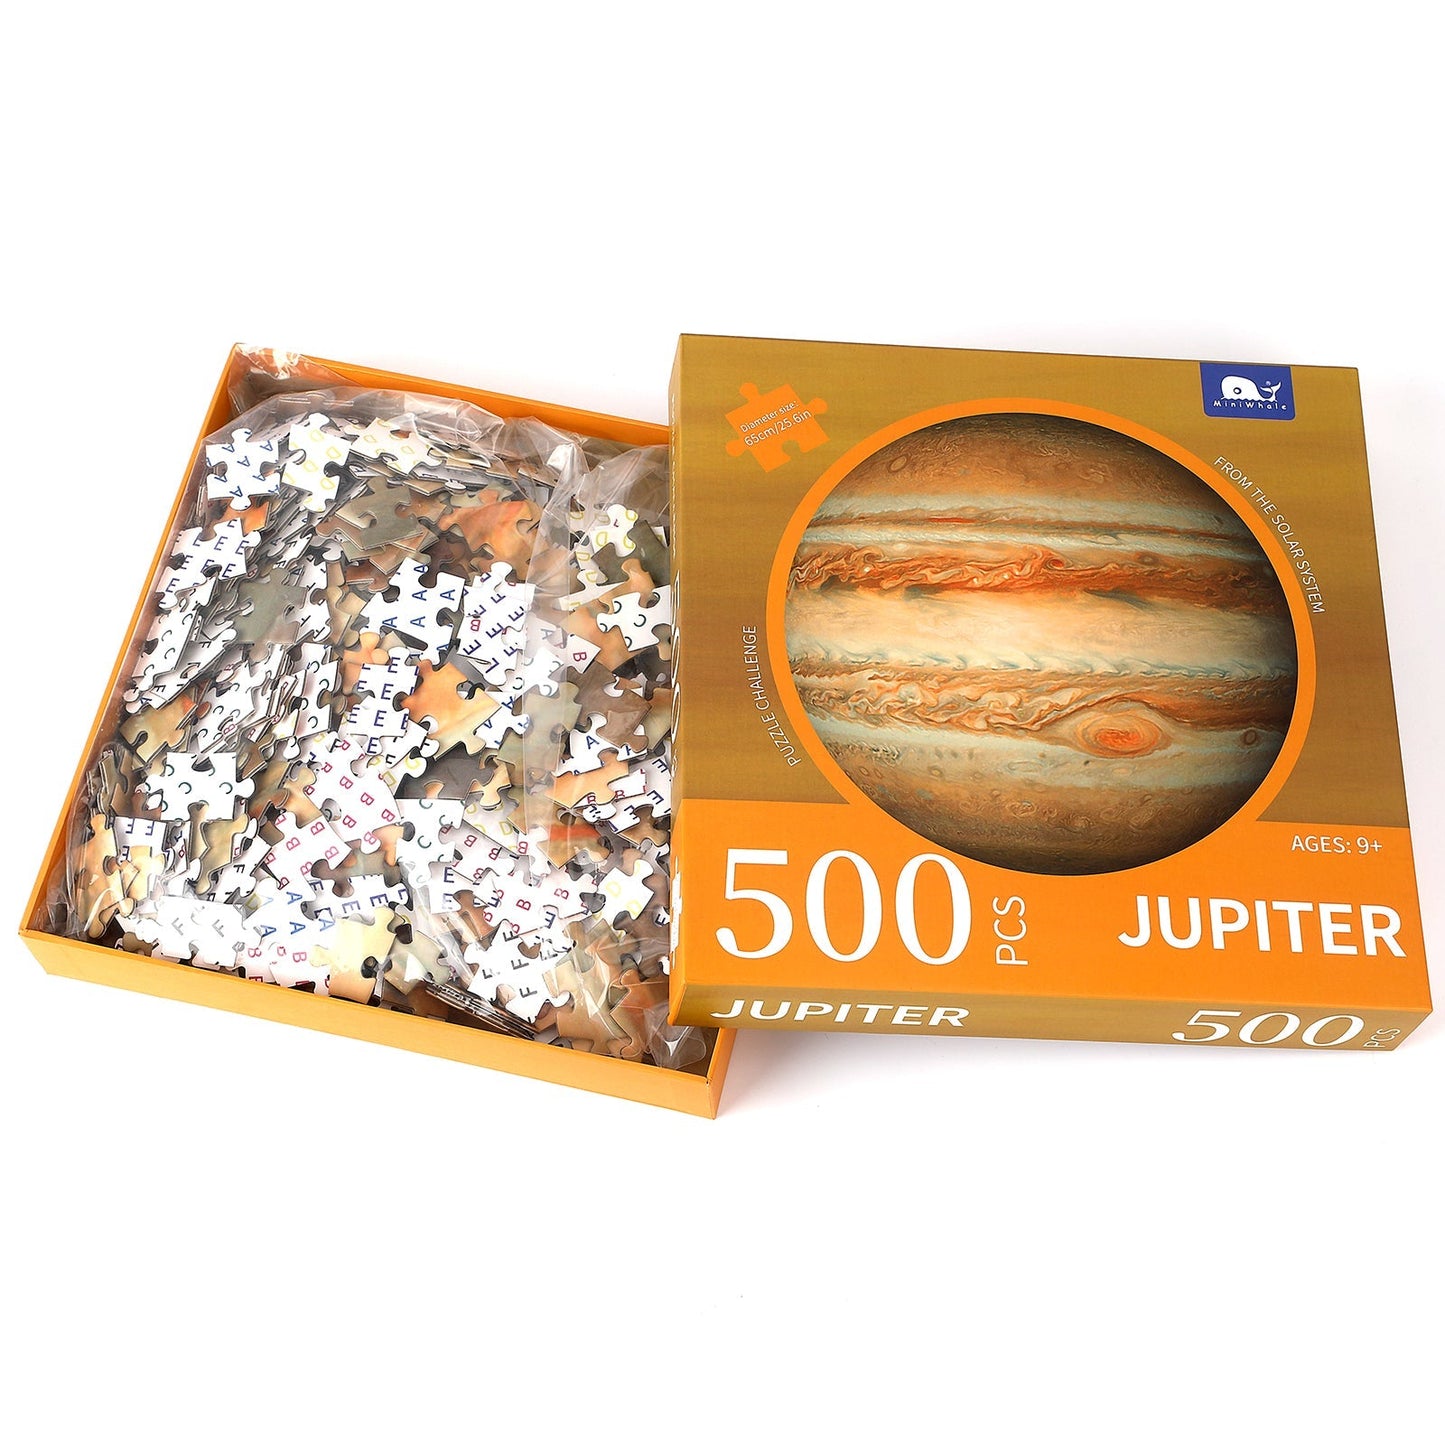 Miniwhale Jupiter adult 500 puzzle game star Themed Round puzzle jigsaw for adults brain